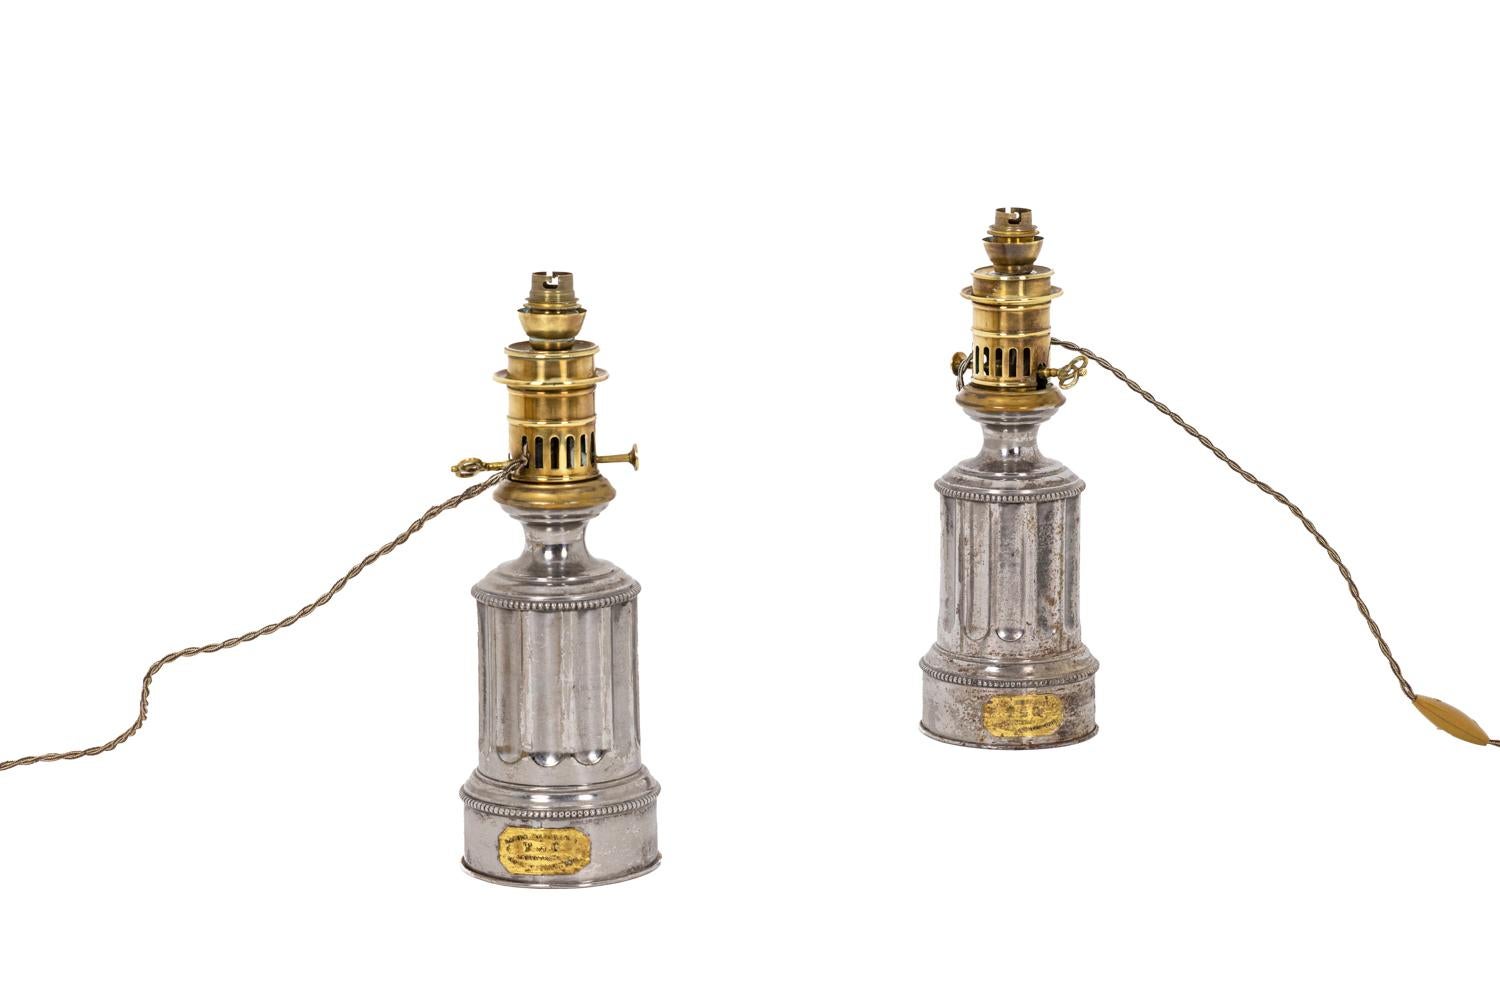 Pair of lamps in tin with a fluted shaft. Decor of frieze of beads on the base and the top of the mount. Gilt cartouche embedded on the base mentioning 